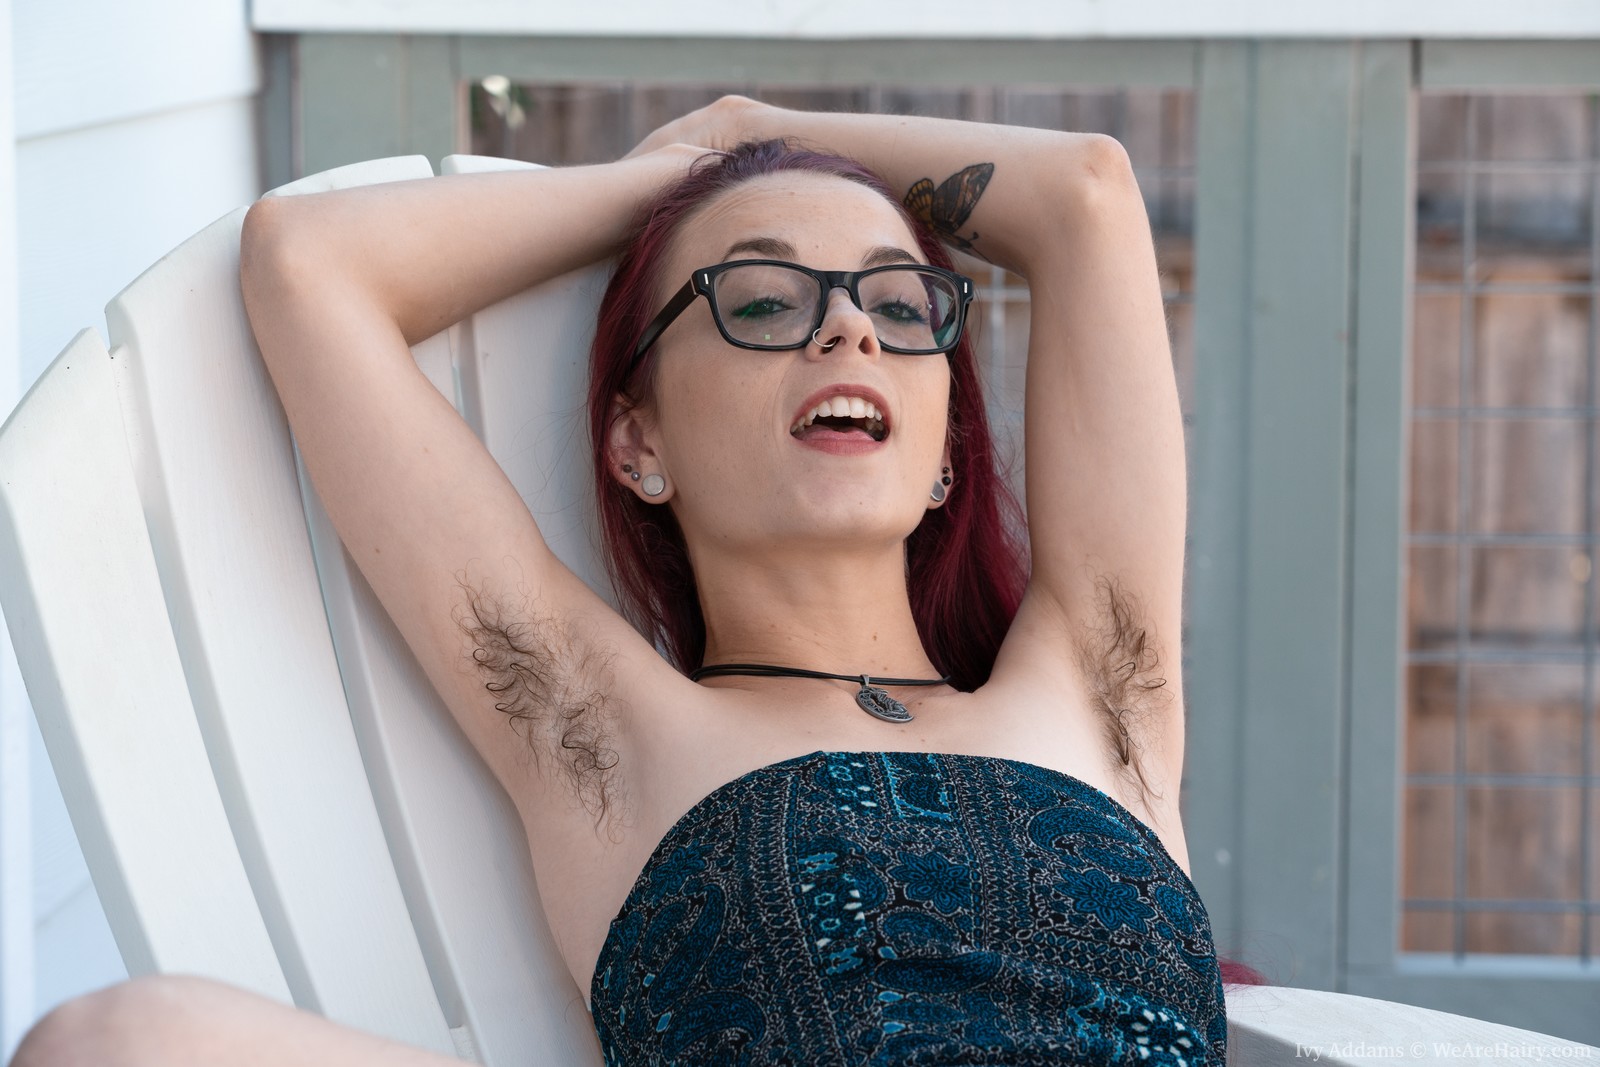 ivy-addams-strips-naked-on-her-outdoor-chair3.jpg